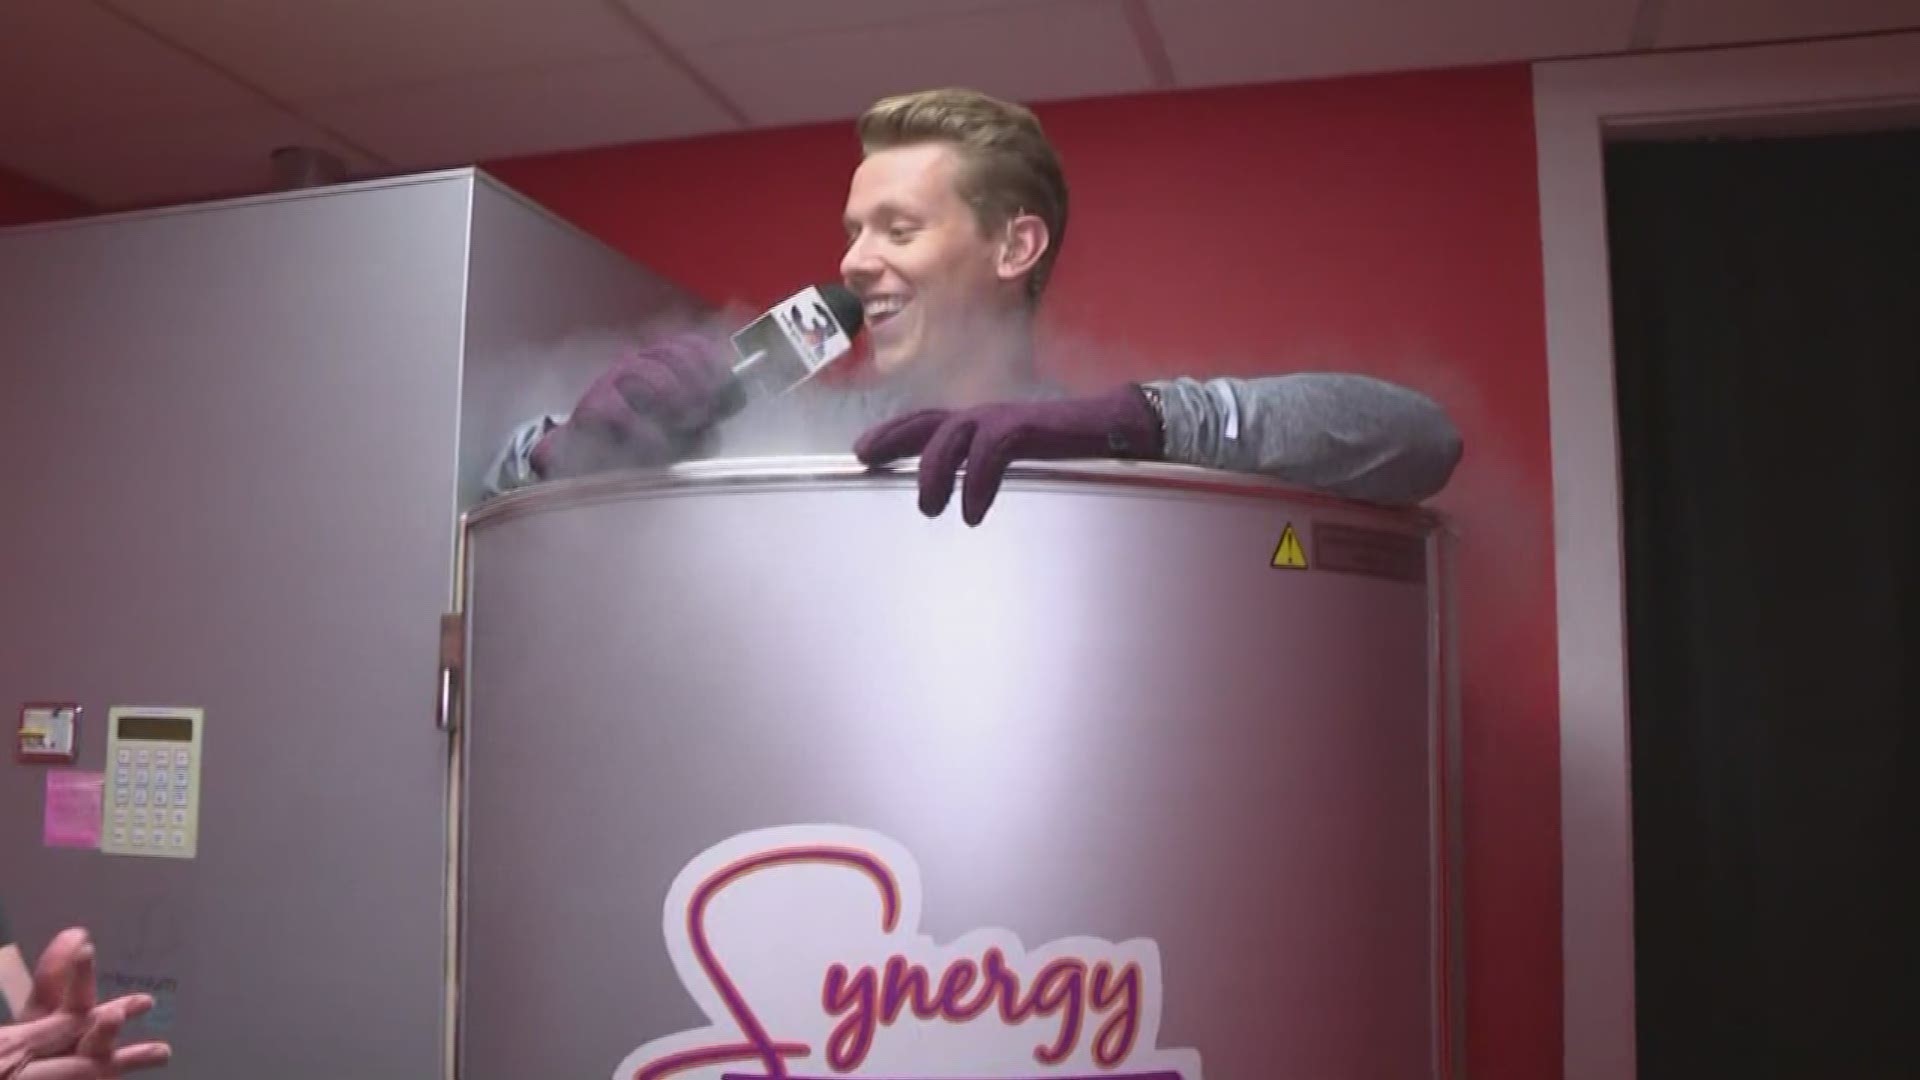 April 18, 2018: The newest member of the WKYC team stepped inside a chilled chamber at Synergy Sports Therapy used for cryotherapy.